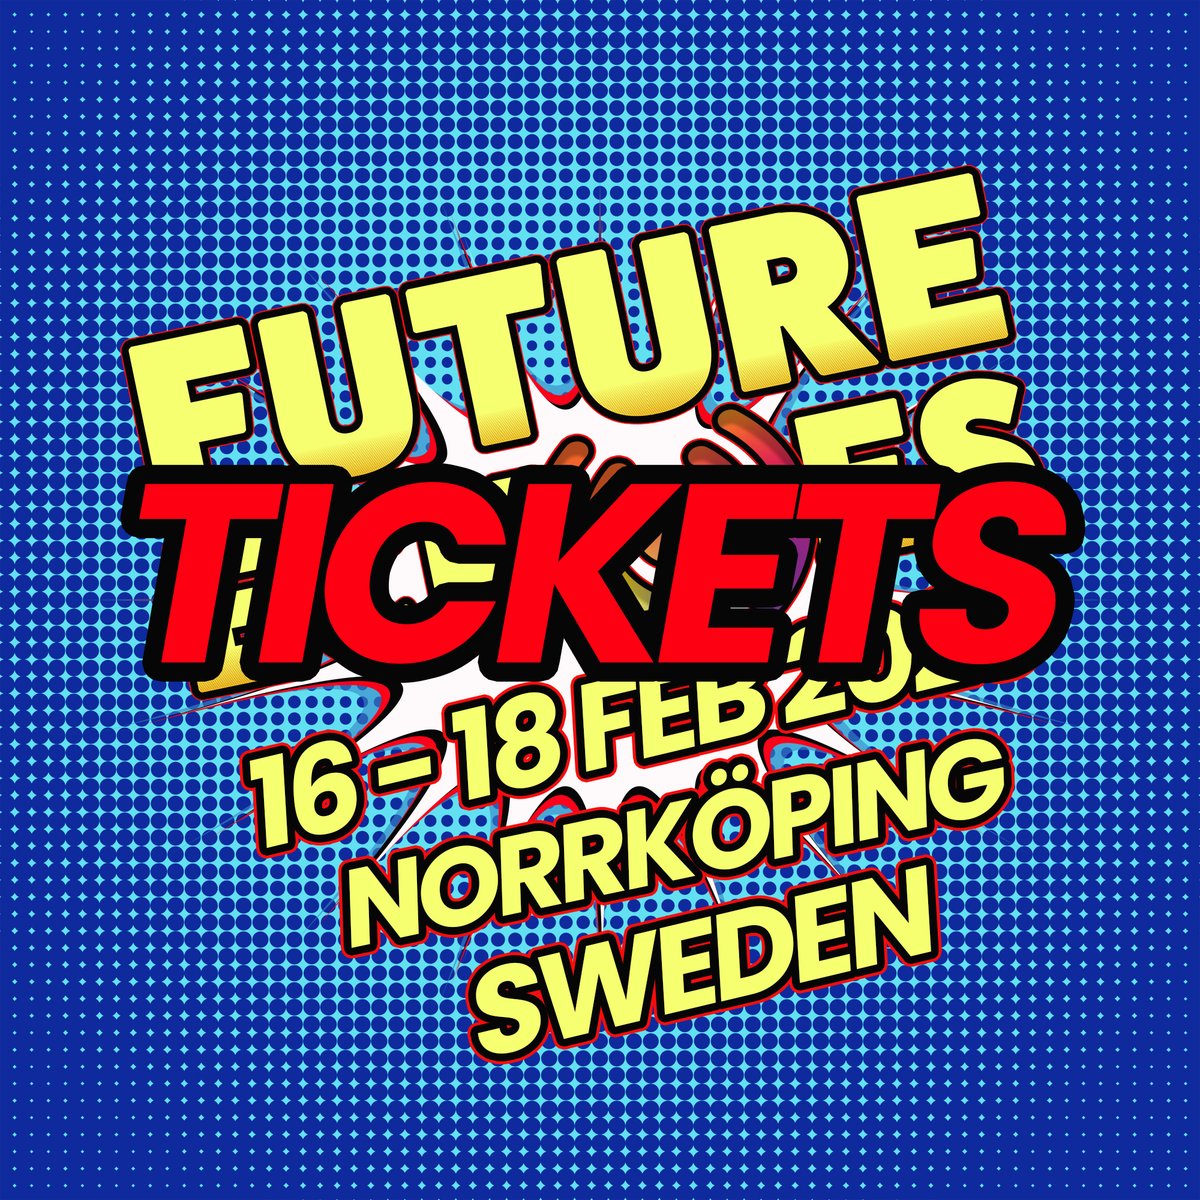 Time to get your tickets, early bird, buy one get two tickets is ending 31 of October. Also we have just released our Pro passes. Check everything on Futureechoes.se